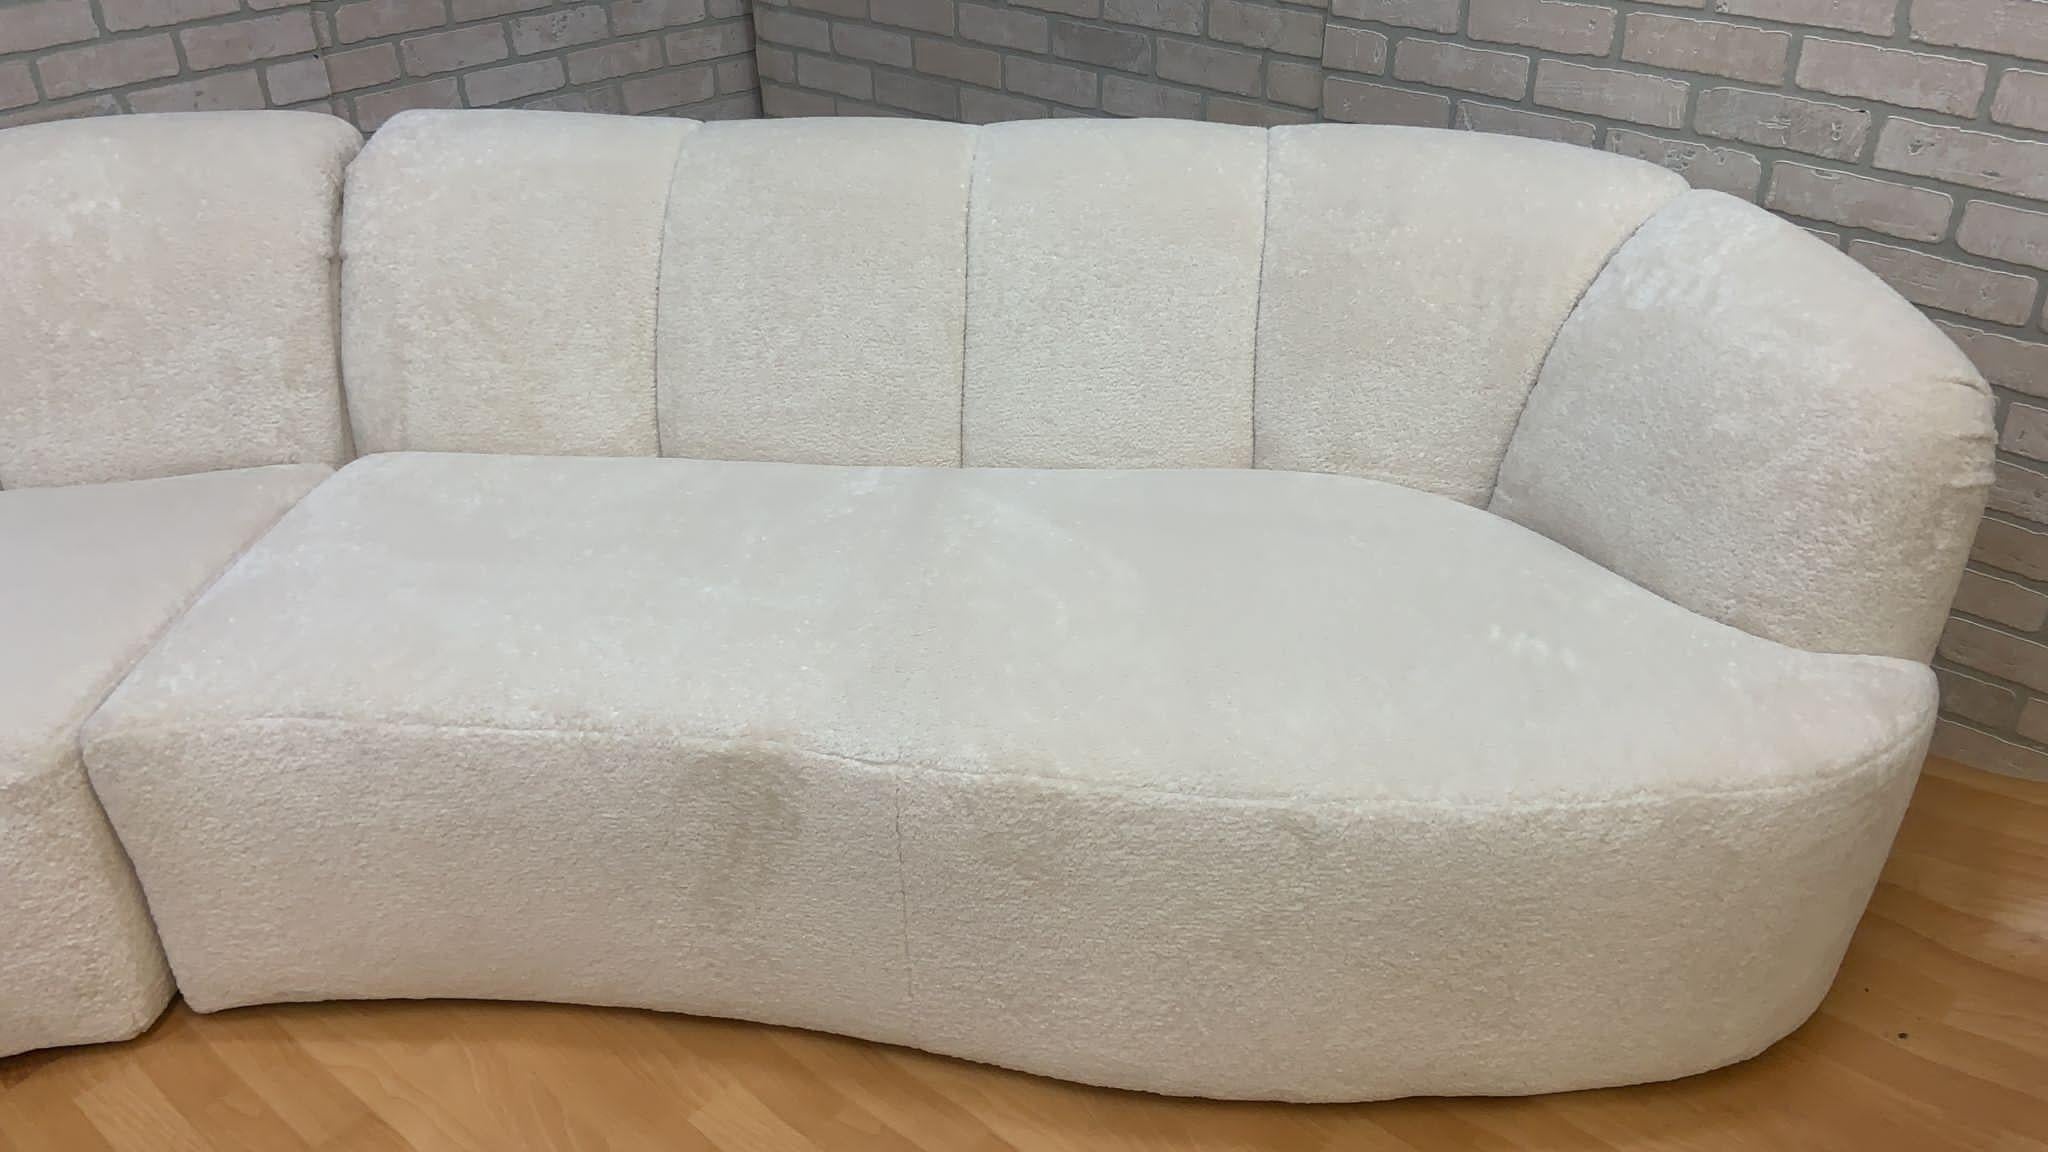 Late 20th Century Curved Channel Back Serpentine Sectional Sofa Newly Upholstered in Alpaca Wool